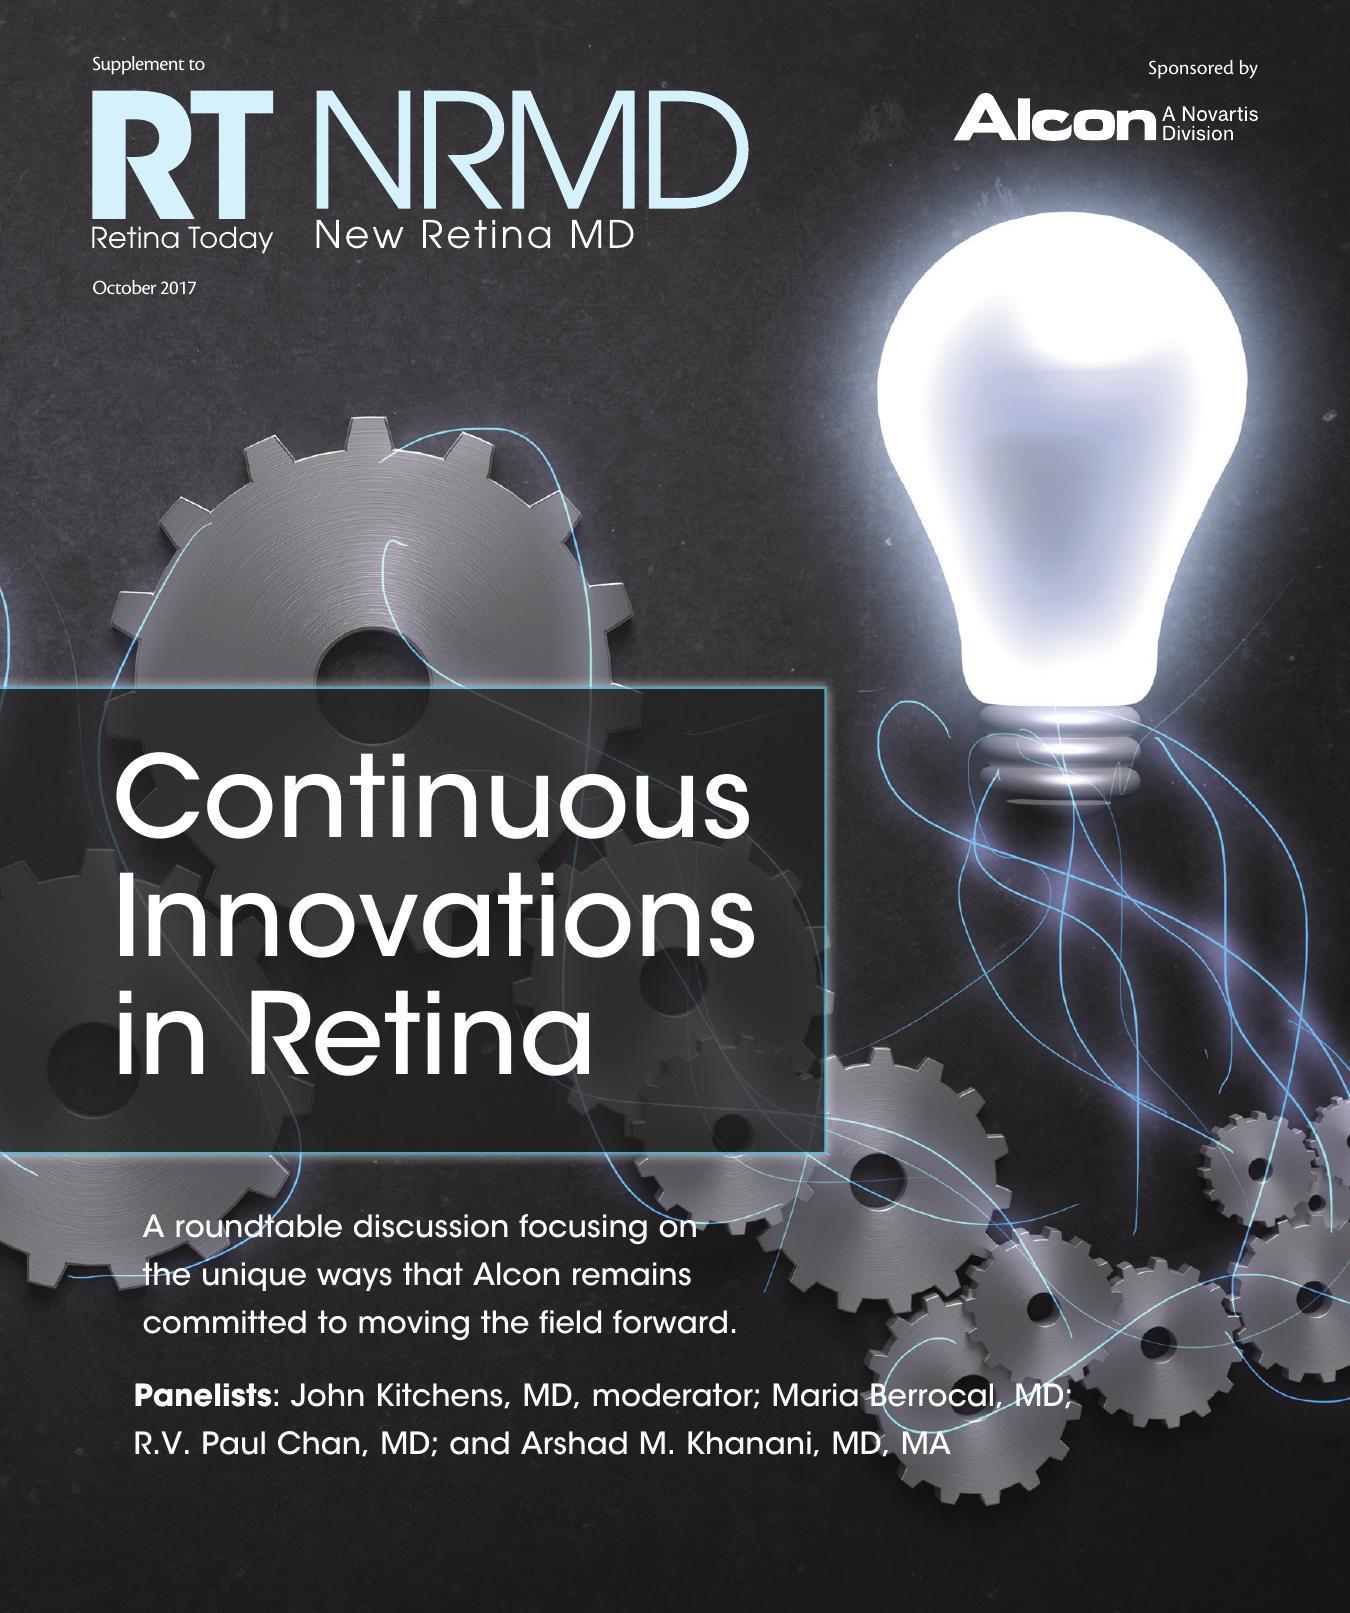 continuous-innovations-in-retina.pdf